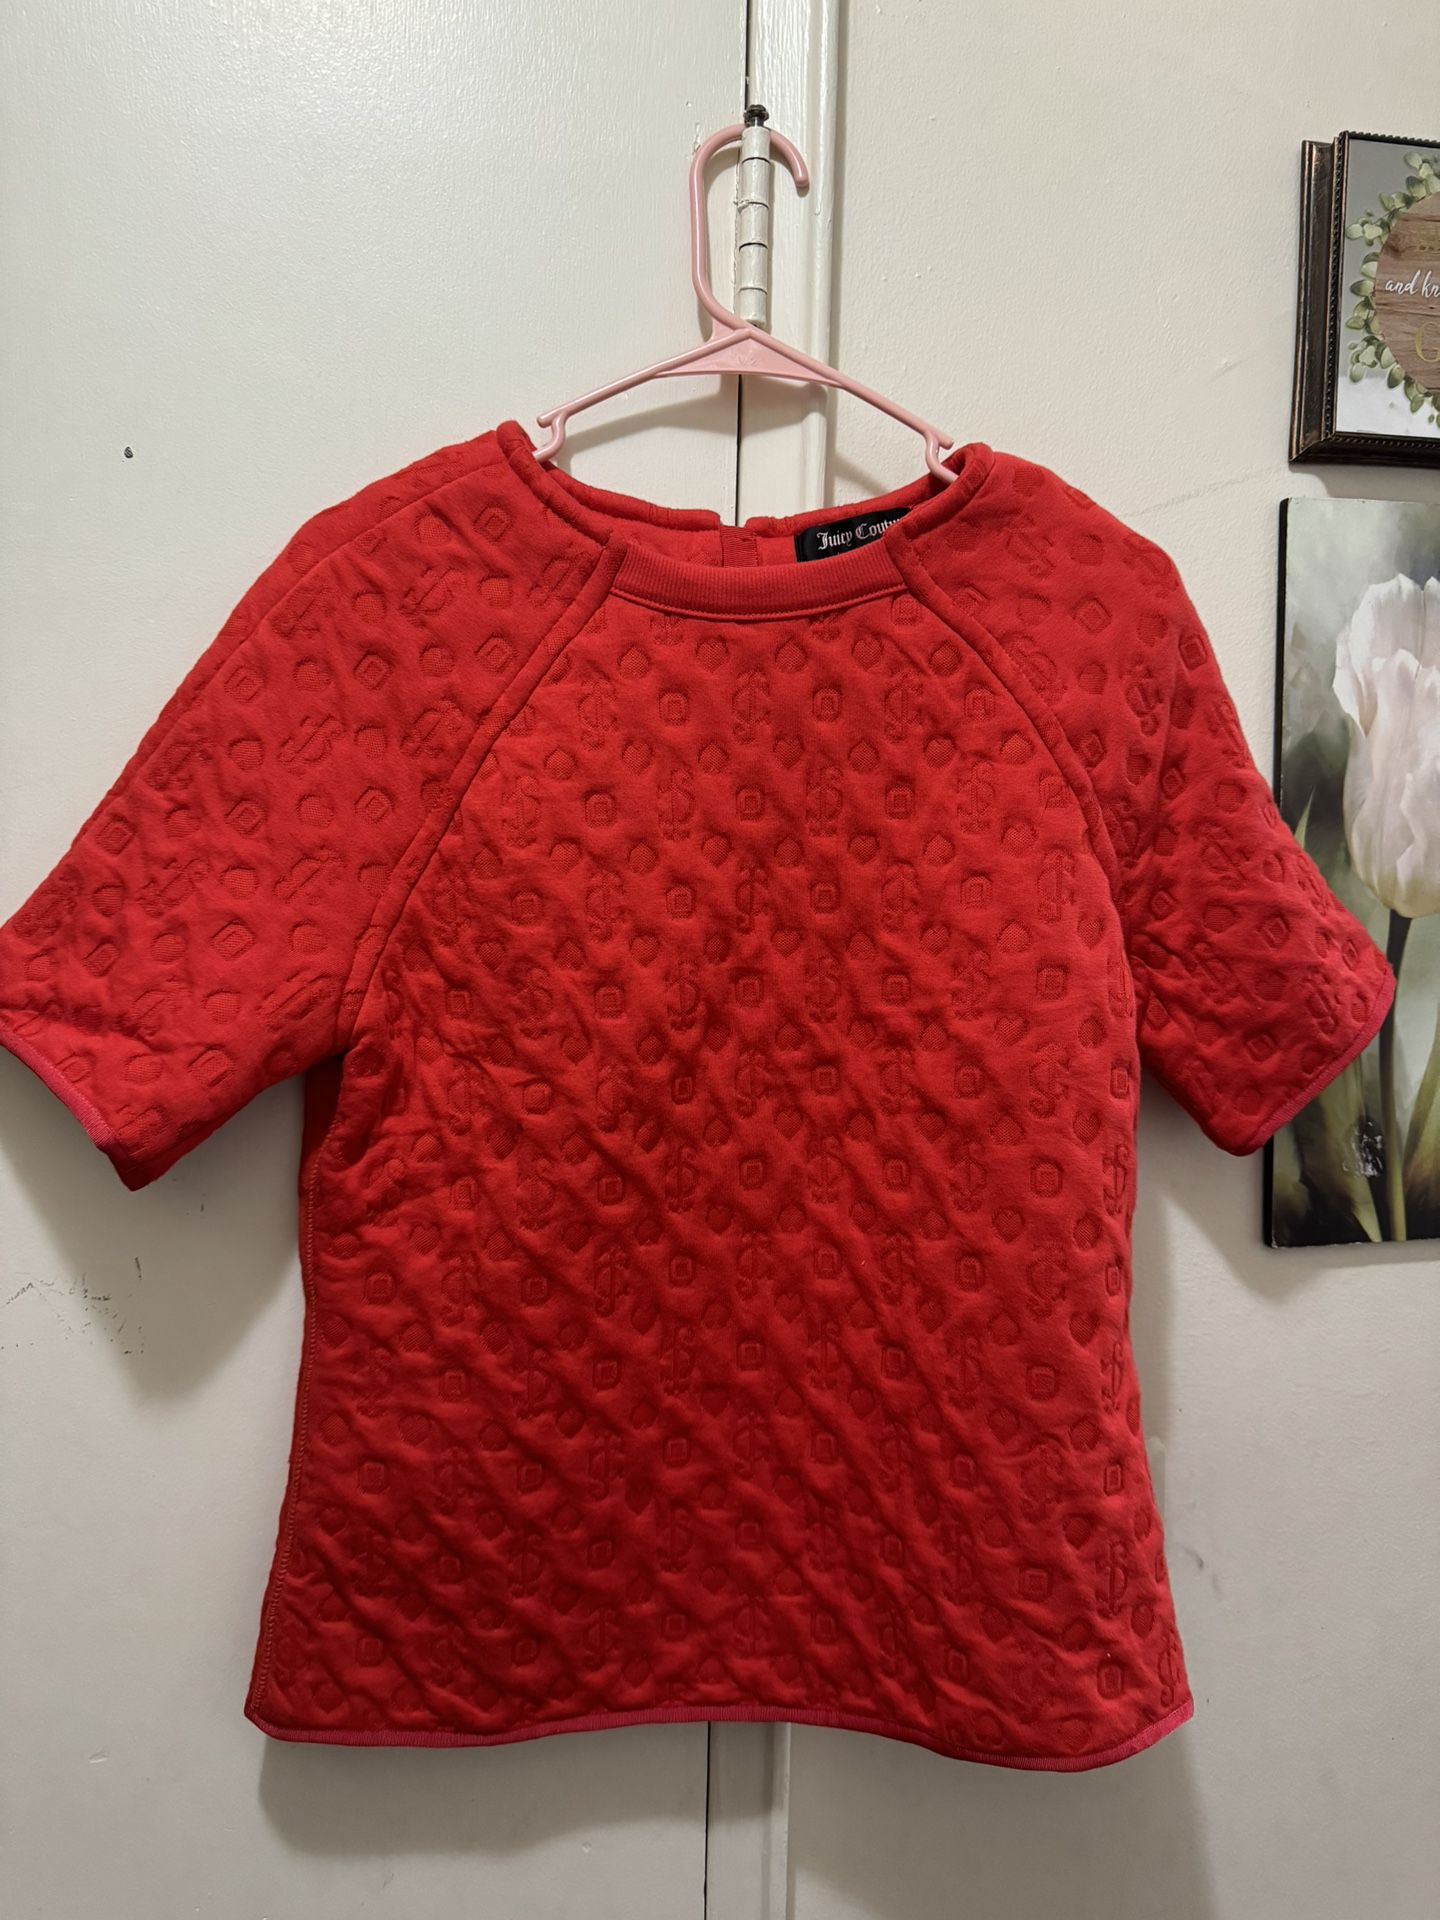 NEW Juicy Couture Womens Red Top Shirt Sweater